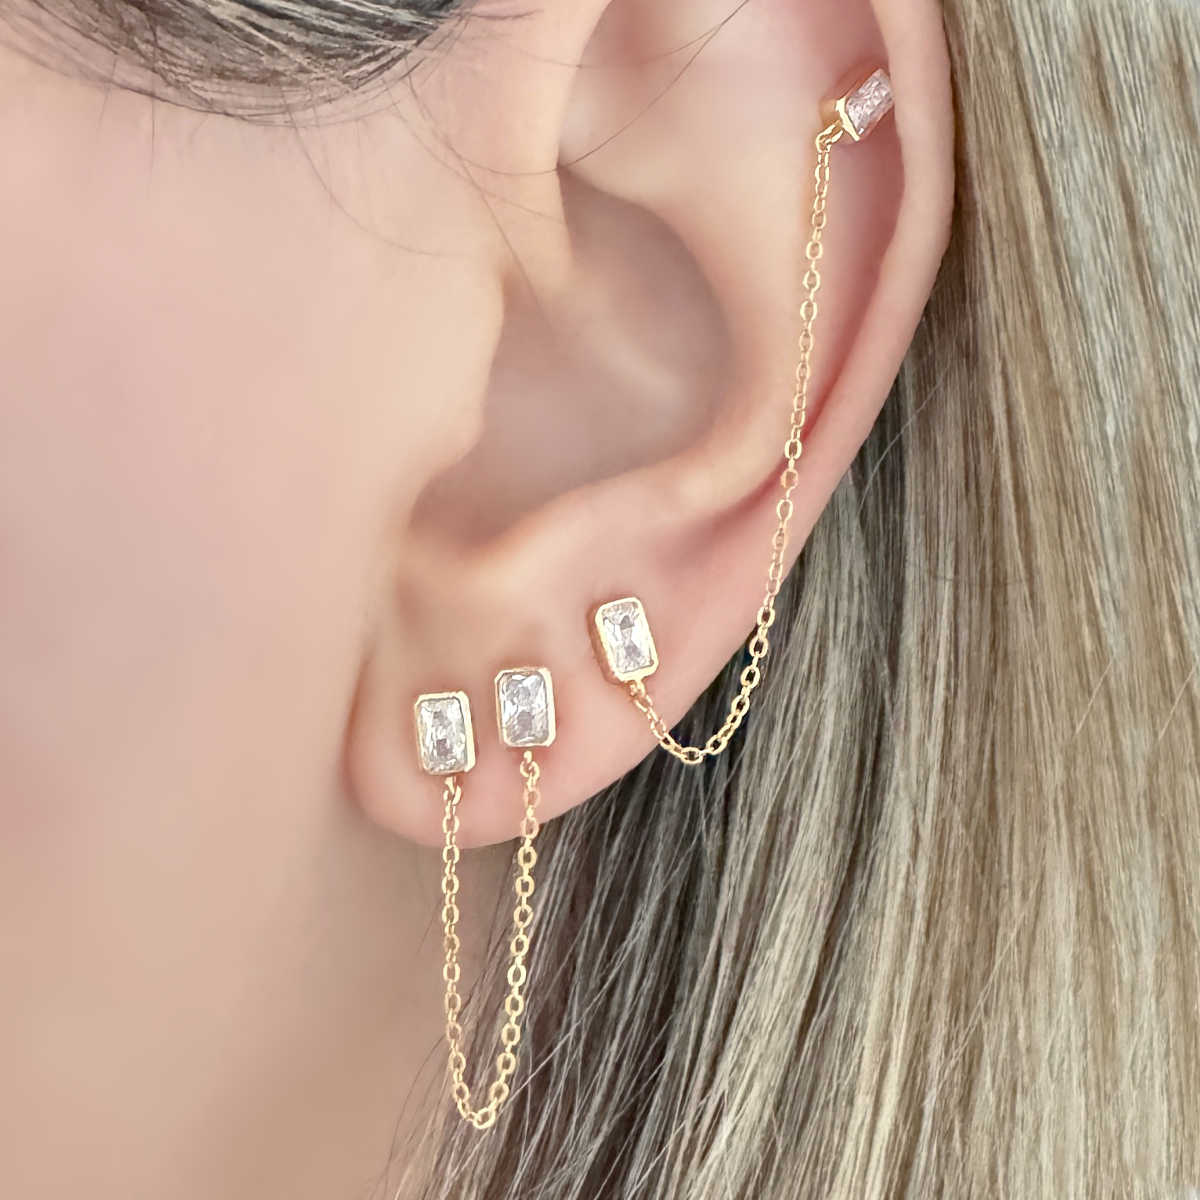 Emerald Cut Chain Connected Studs, Double Piercing Earrings on Model